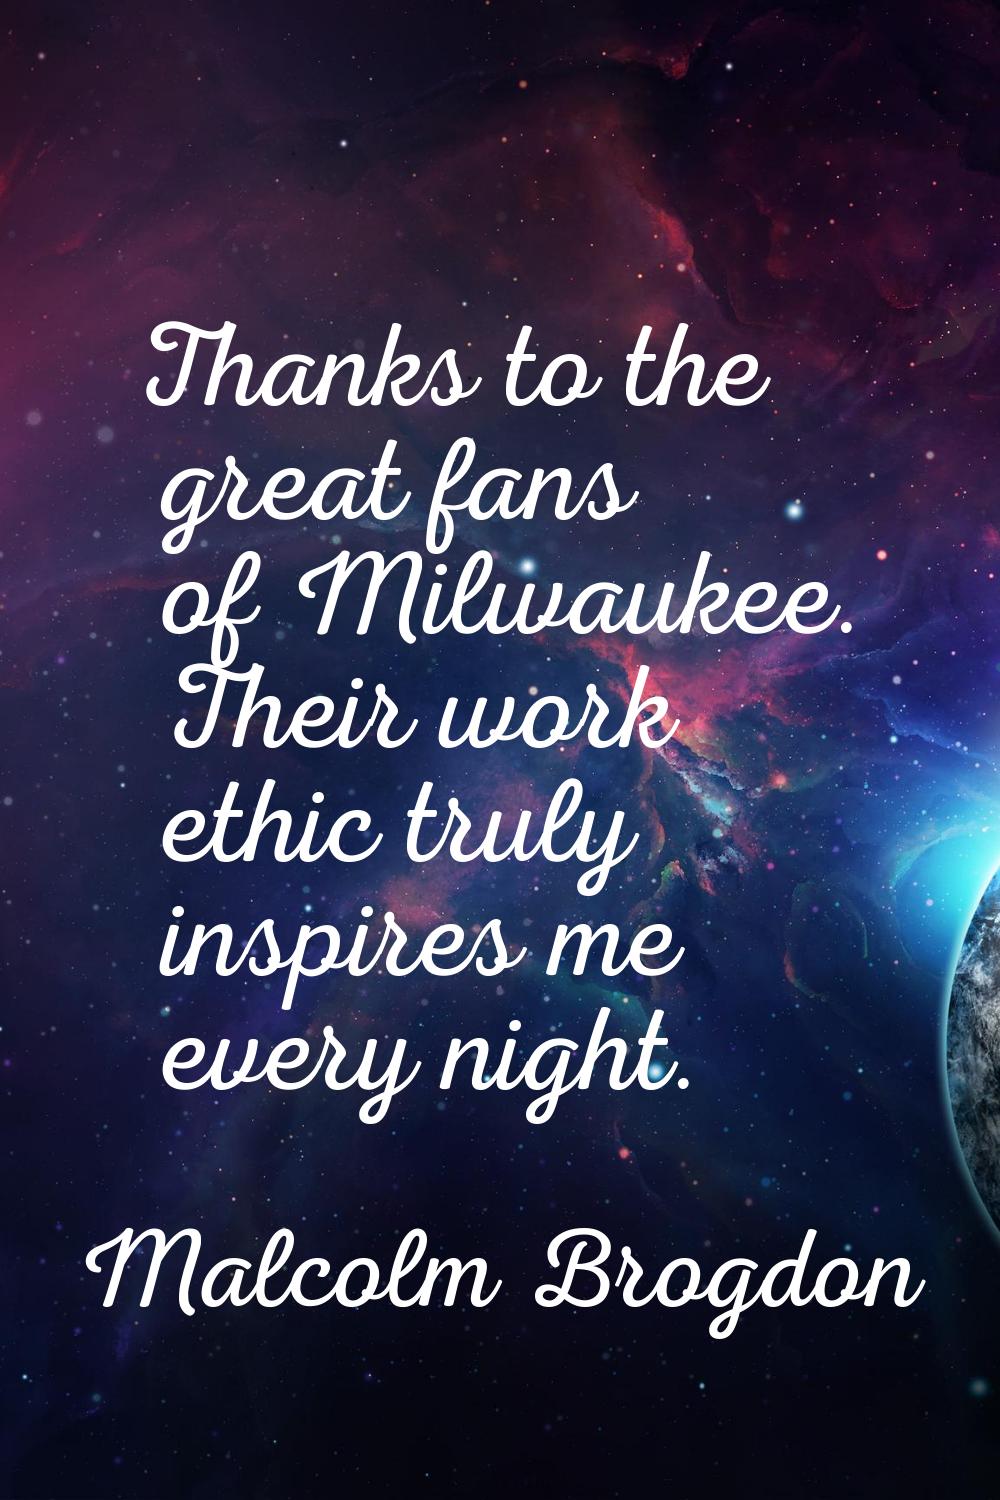 Thanks to the great fans of Milwaukee. Their work ethic truly inspires me every night.